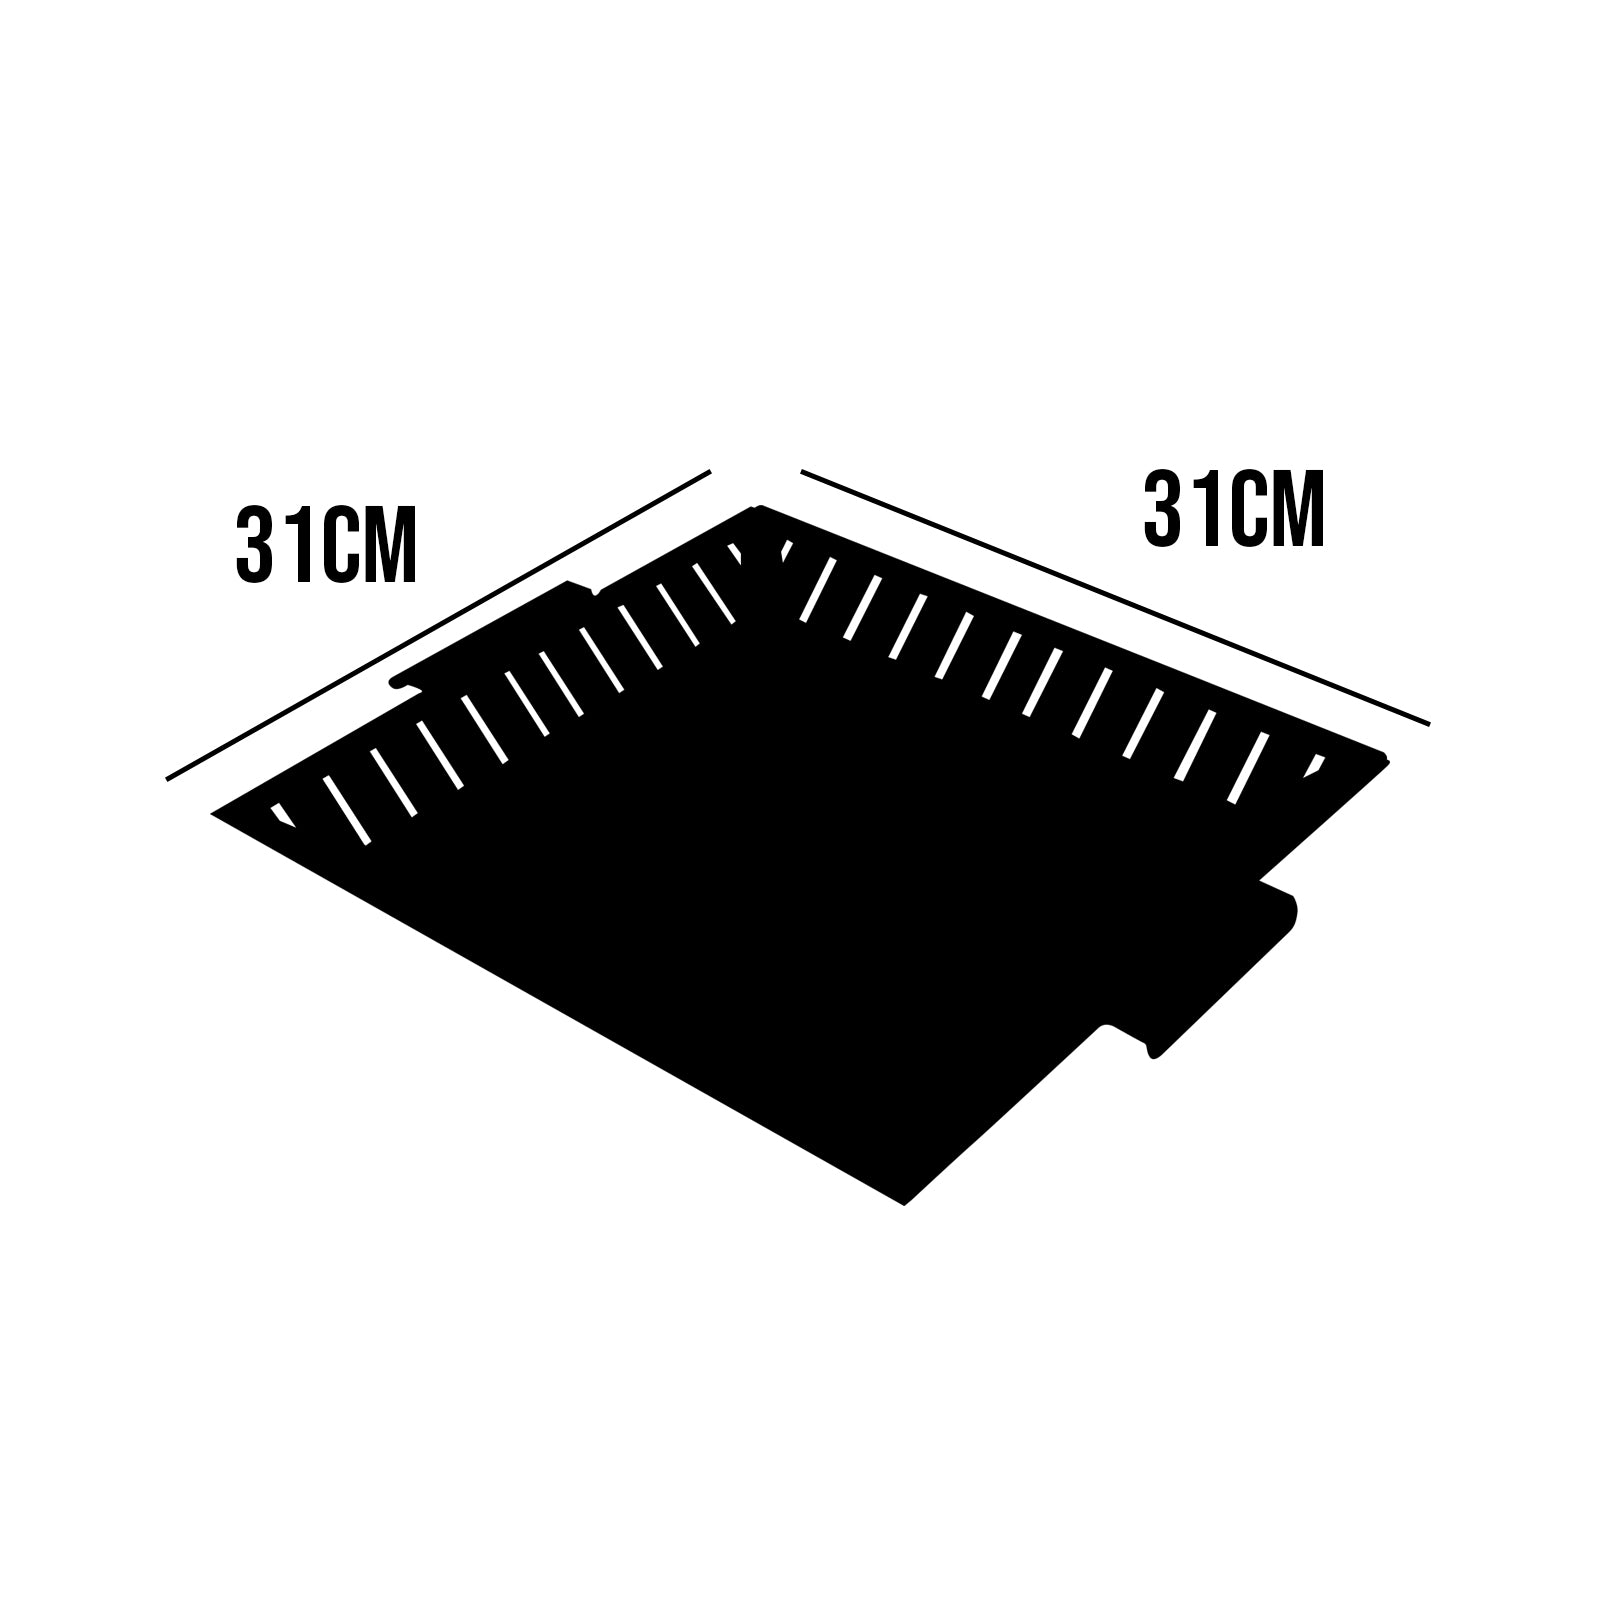 Stainless Steel Grill Basket Dimensions